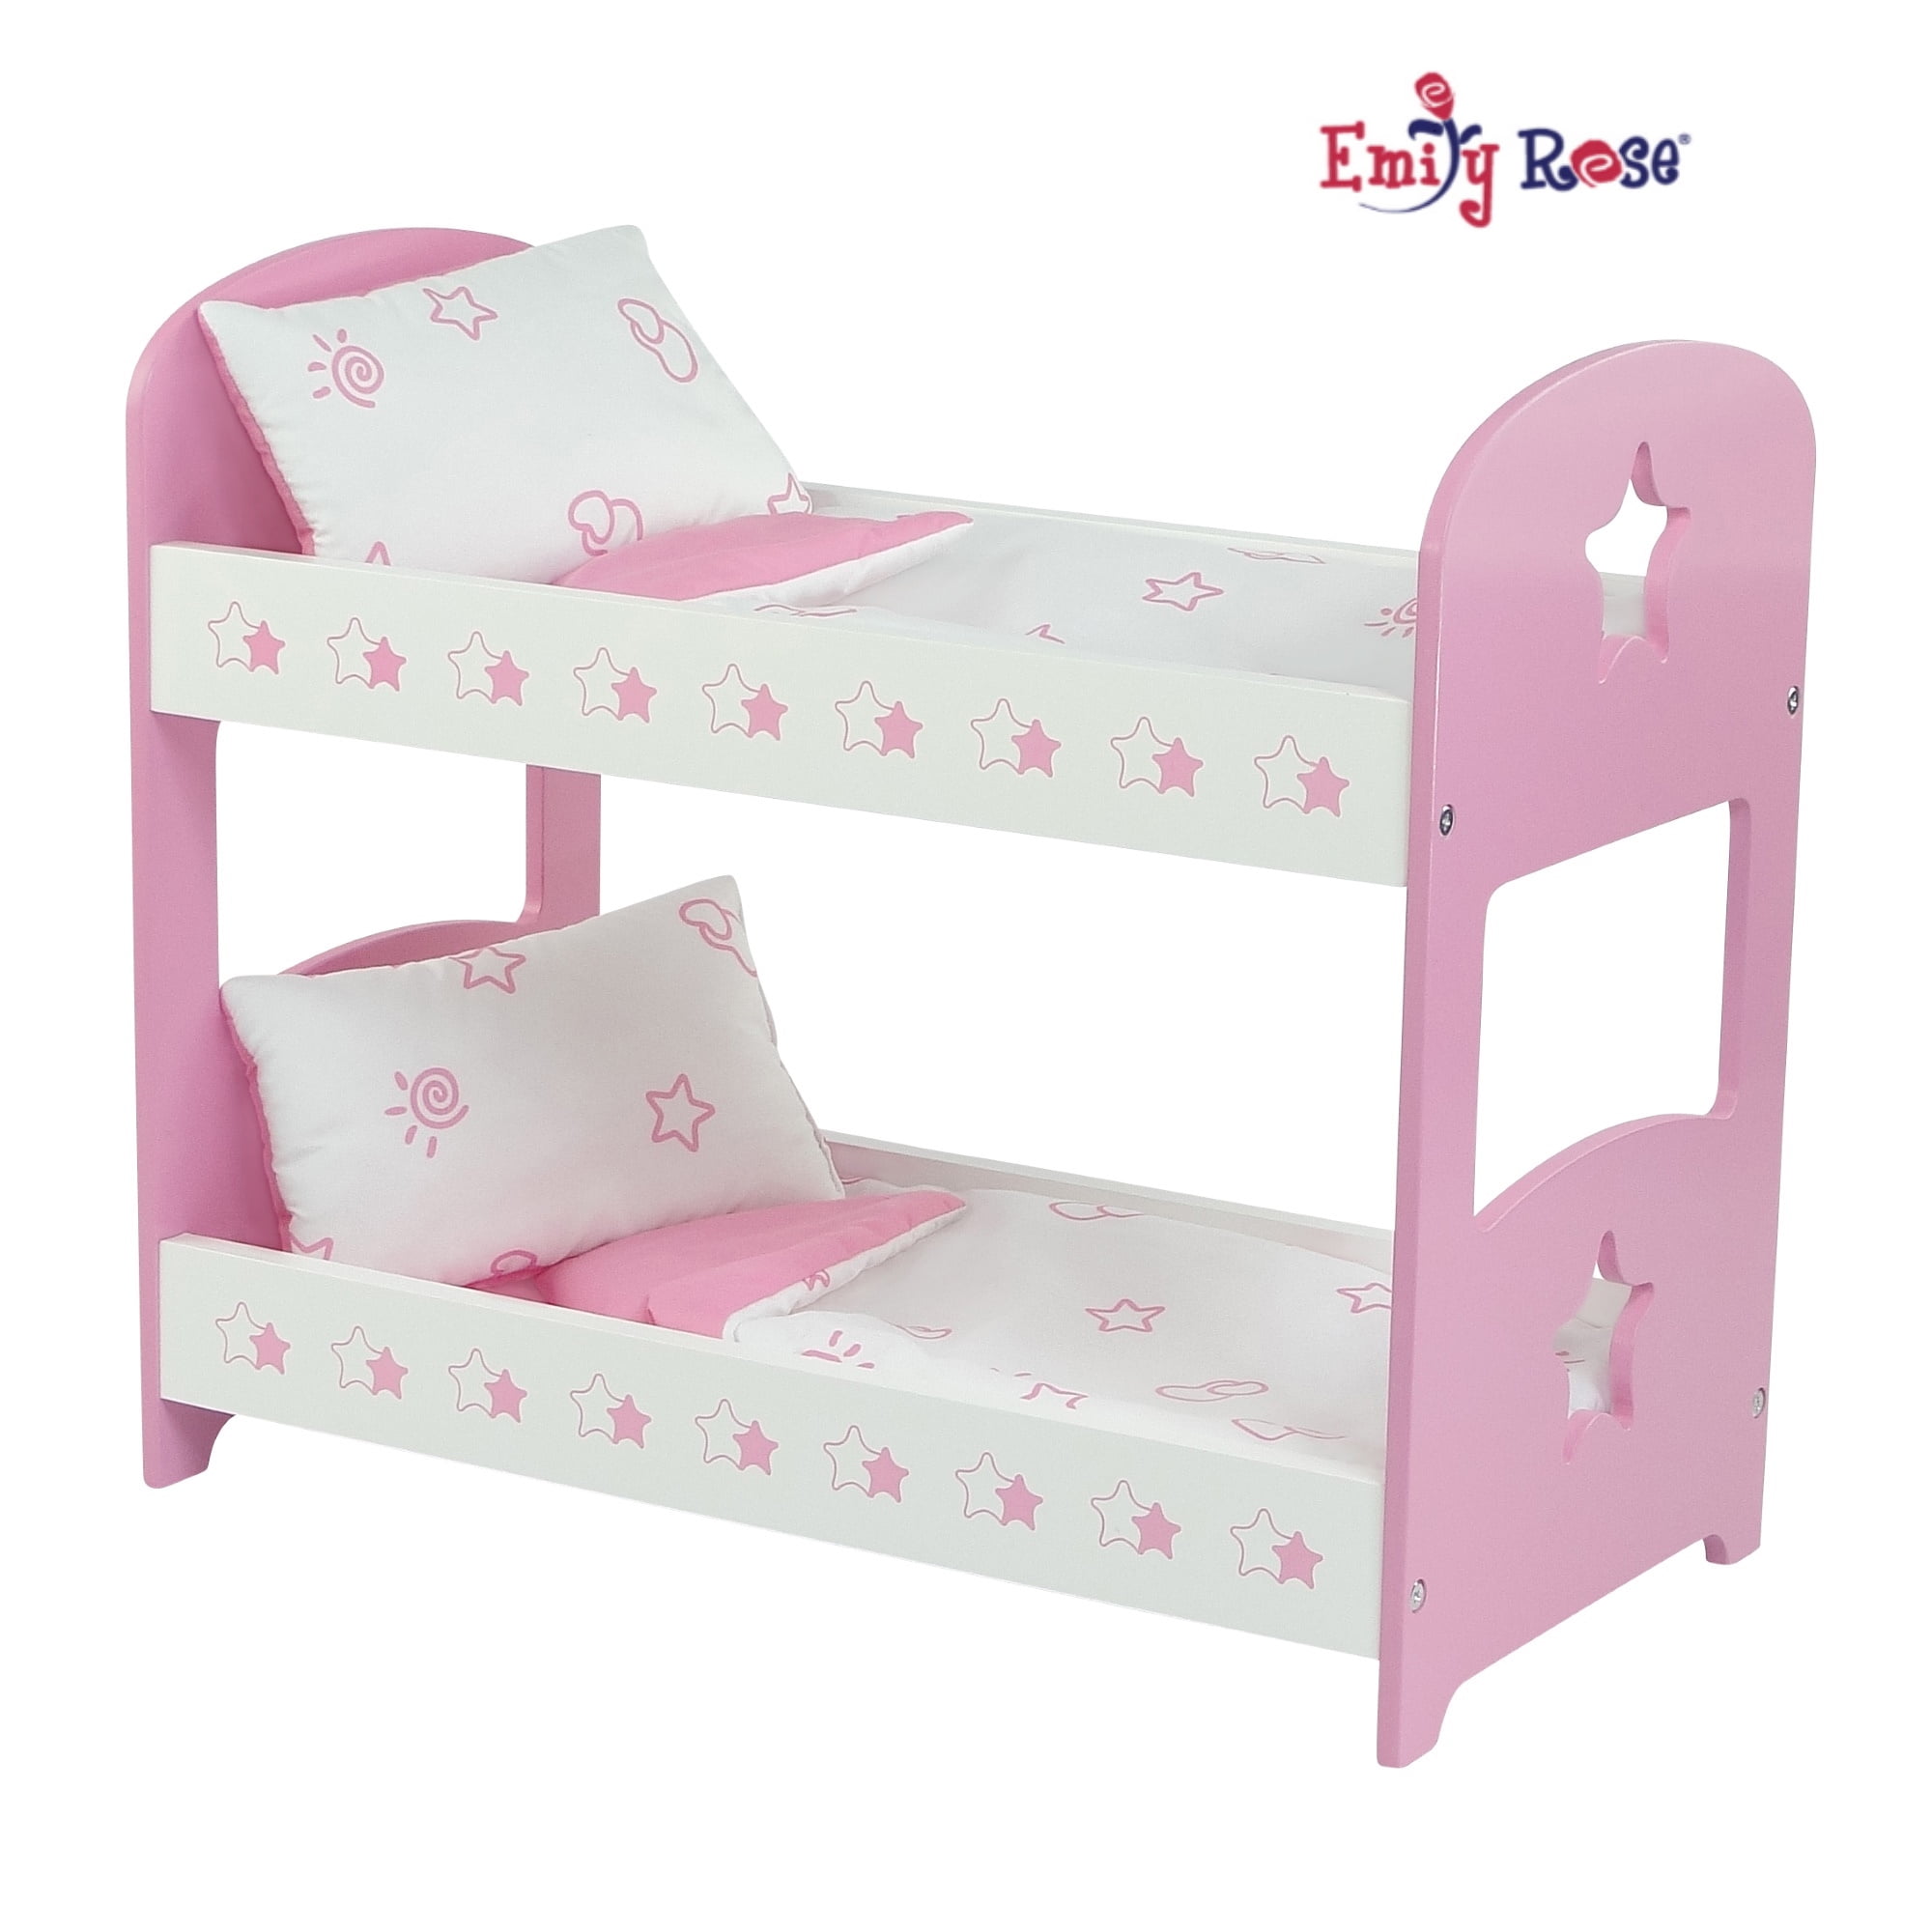 18 Inch Doll Bunk Bed Furniture, Emily Rose Triple Bunk Bed